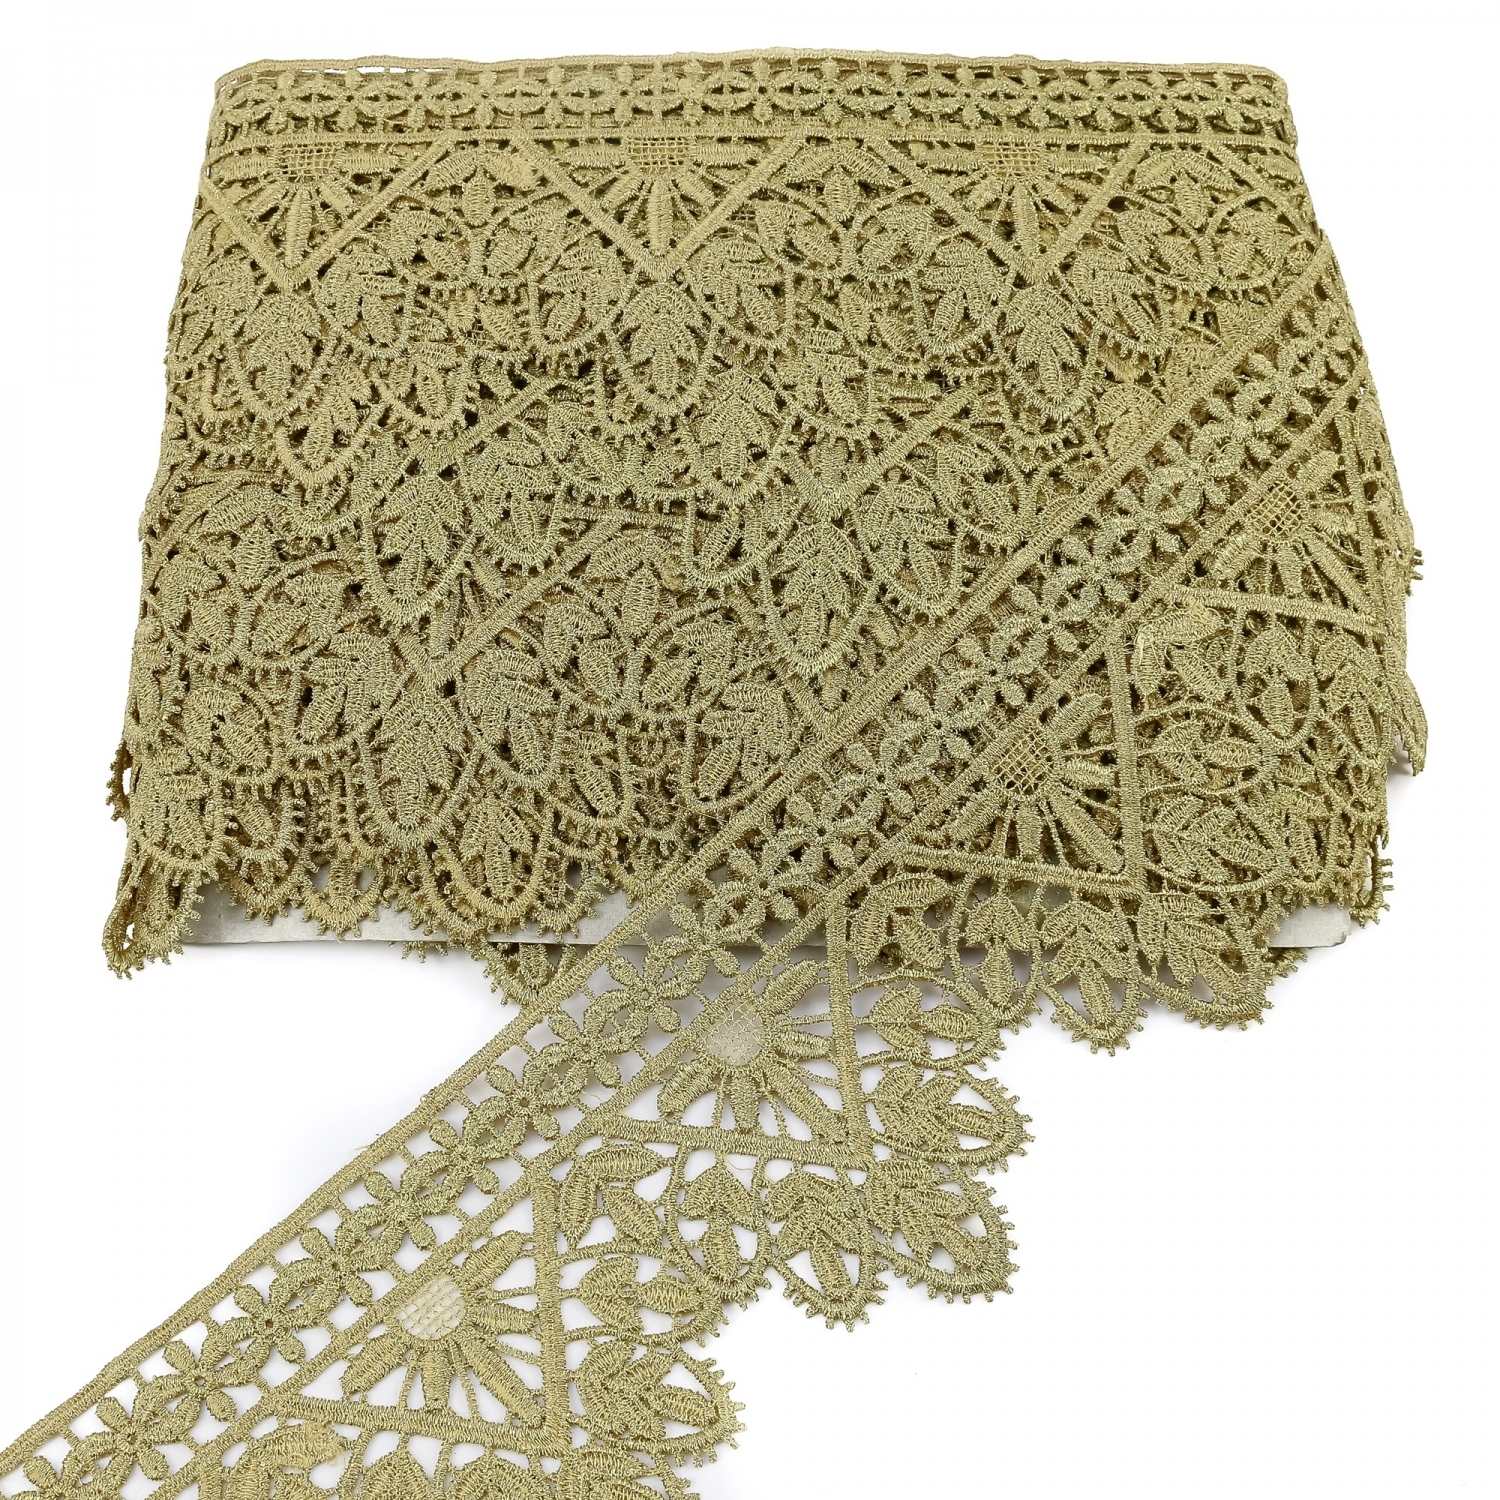 Border Lace Embroidered, width 10 cm (18.29 meters/roll)Code: LA1126